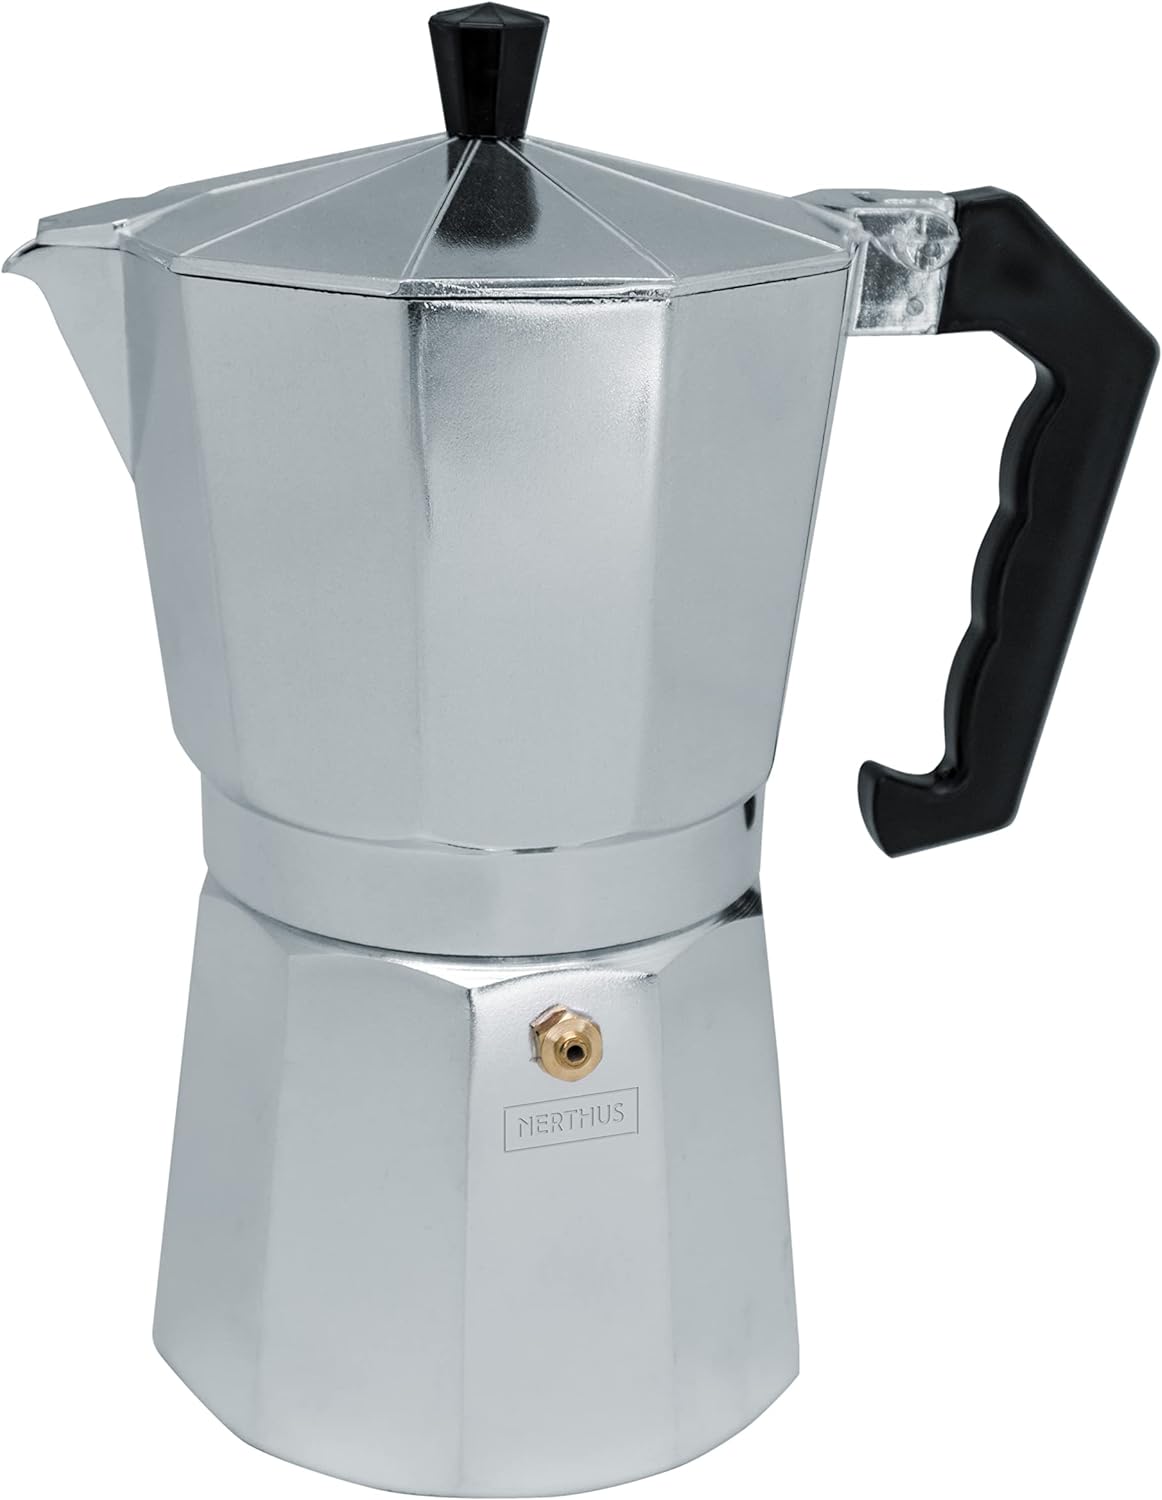 Nerthus fih 835 Induction Coffee Maker 9 Cup Classic Italian Coffee Maker